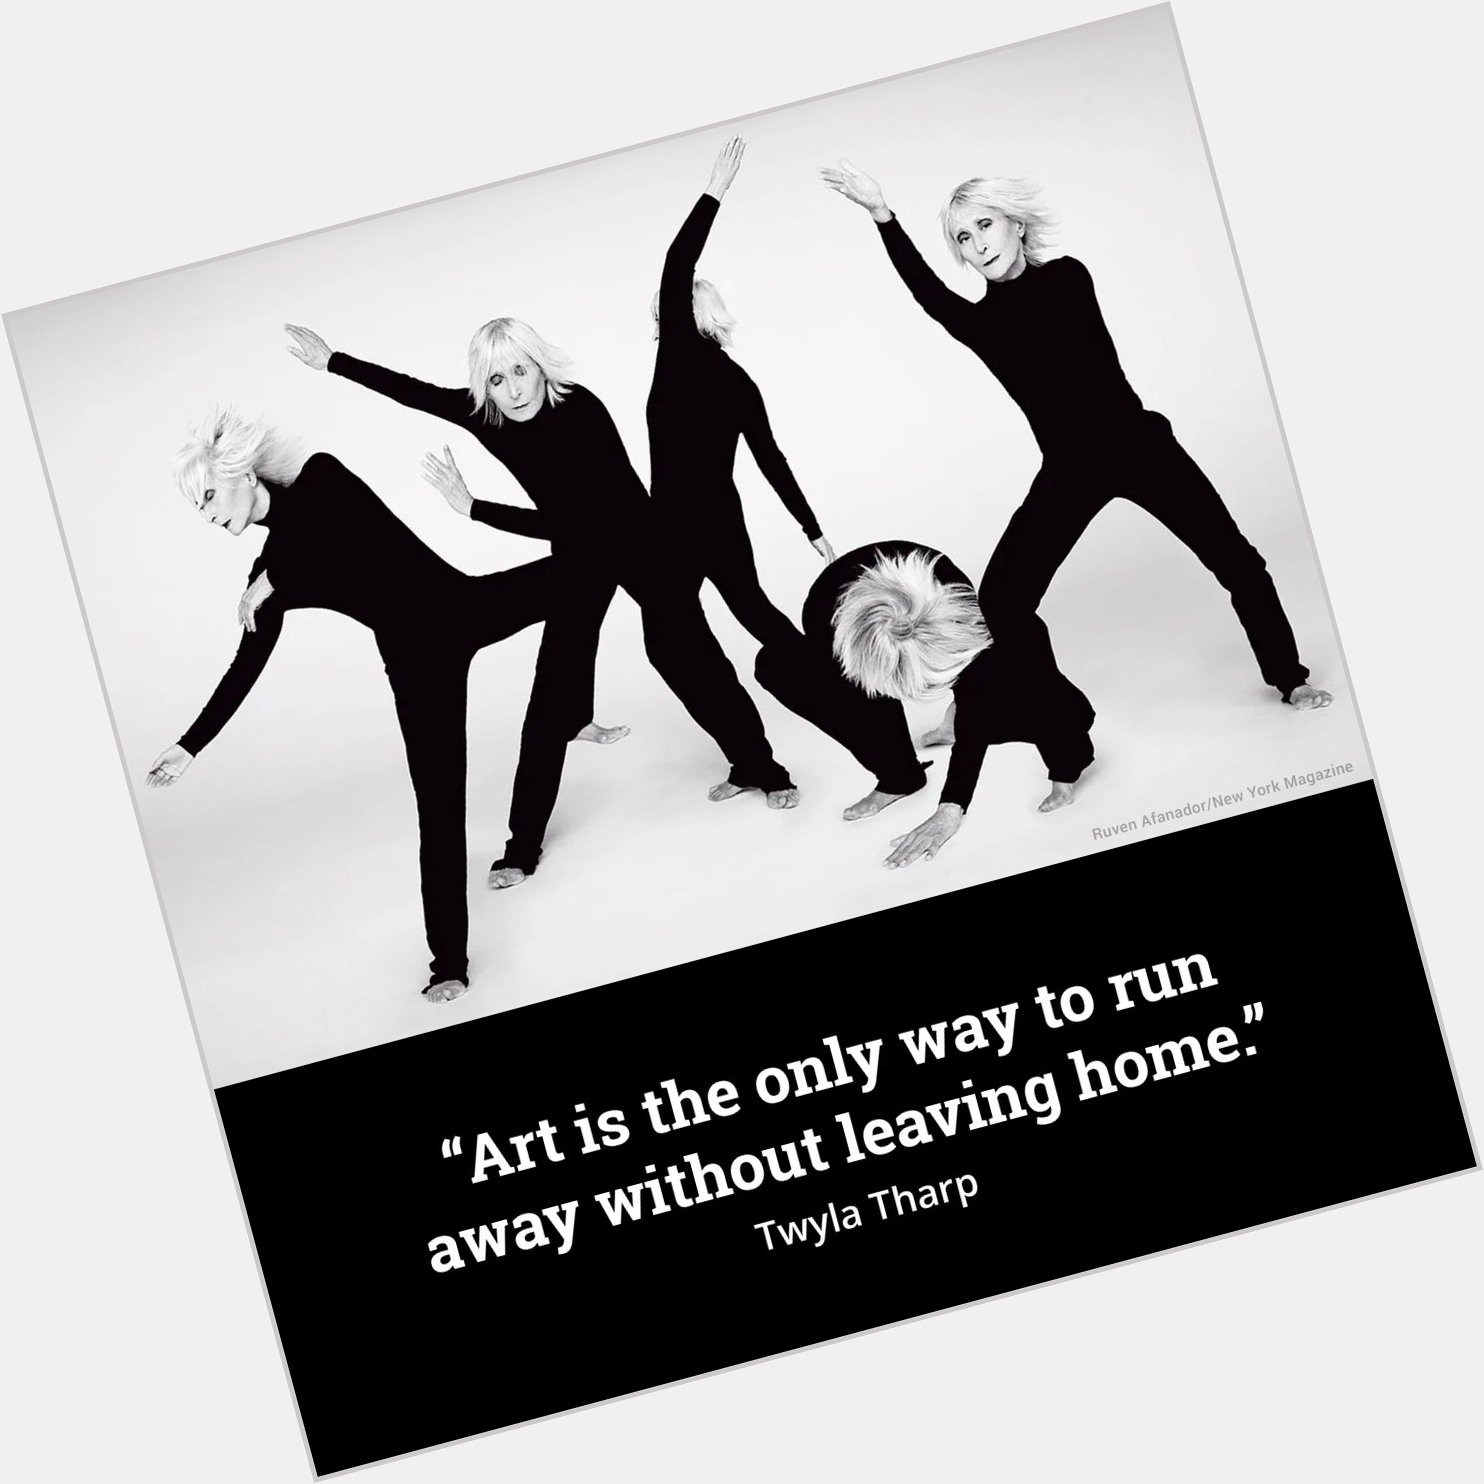 Happy birthday, Twyla Tharp! The American dancer, choreographer, and author turns 80 years young today. 